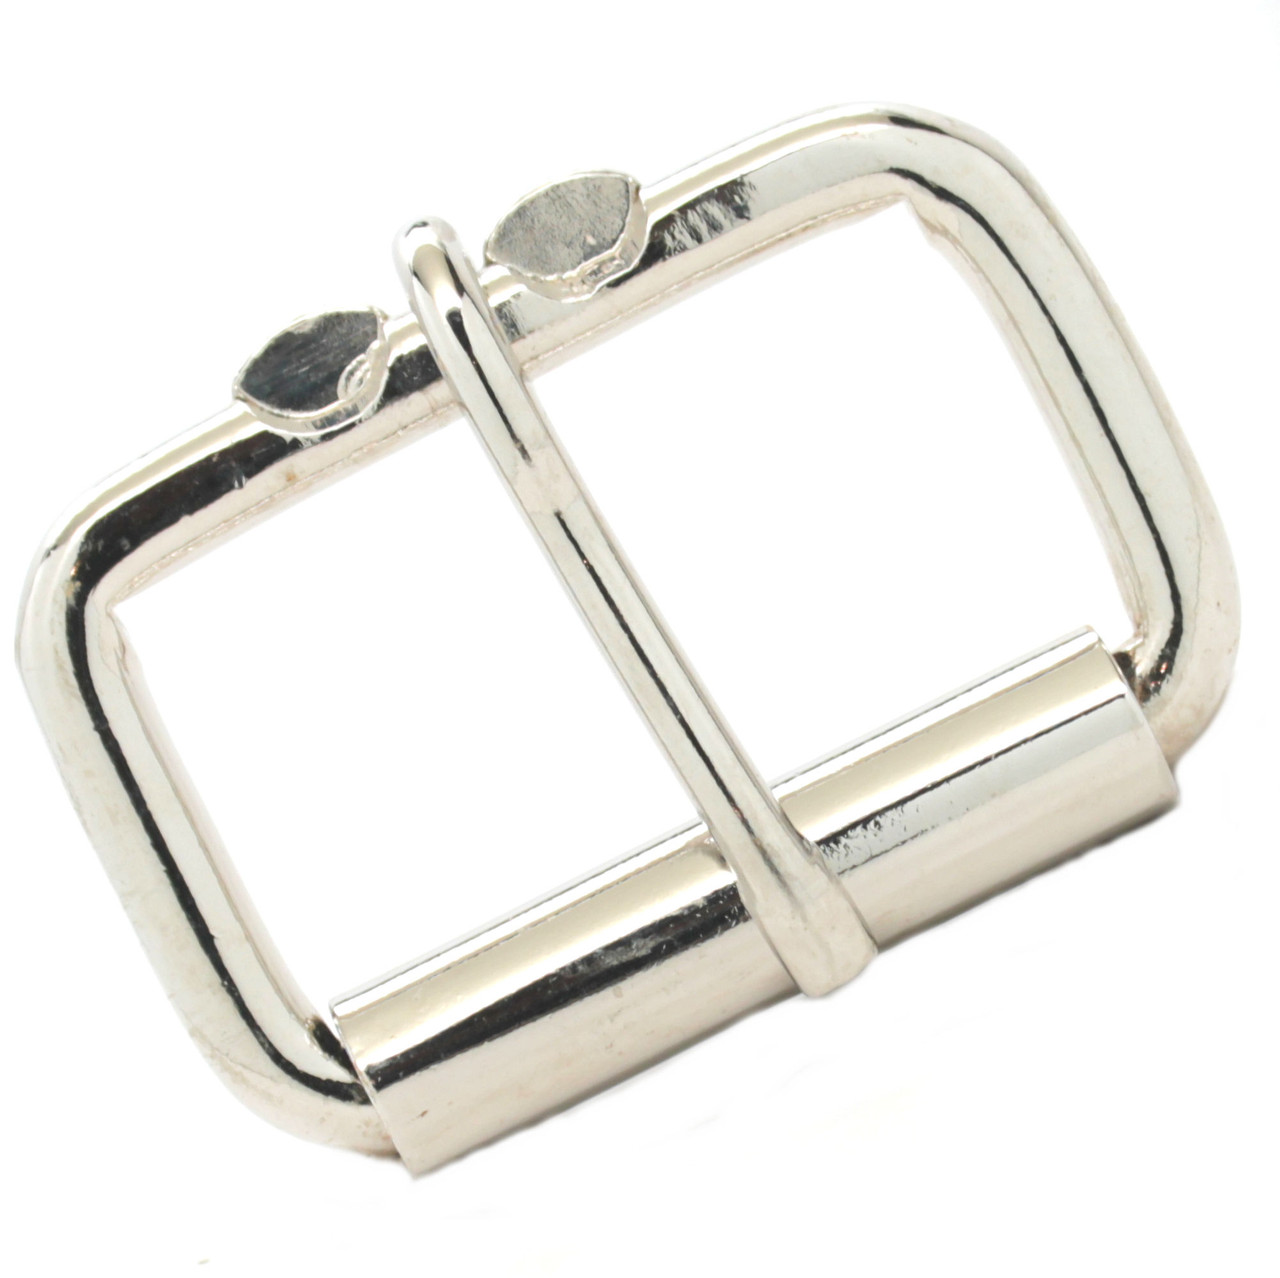 Nickel single prong roller buckle front side.